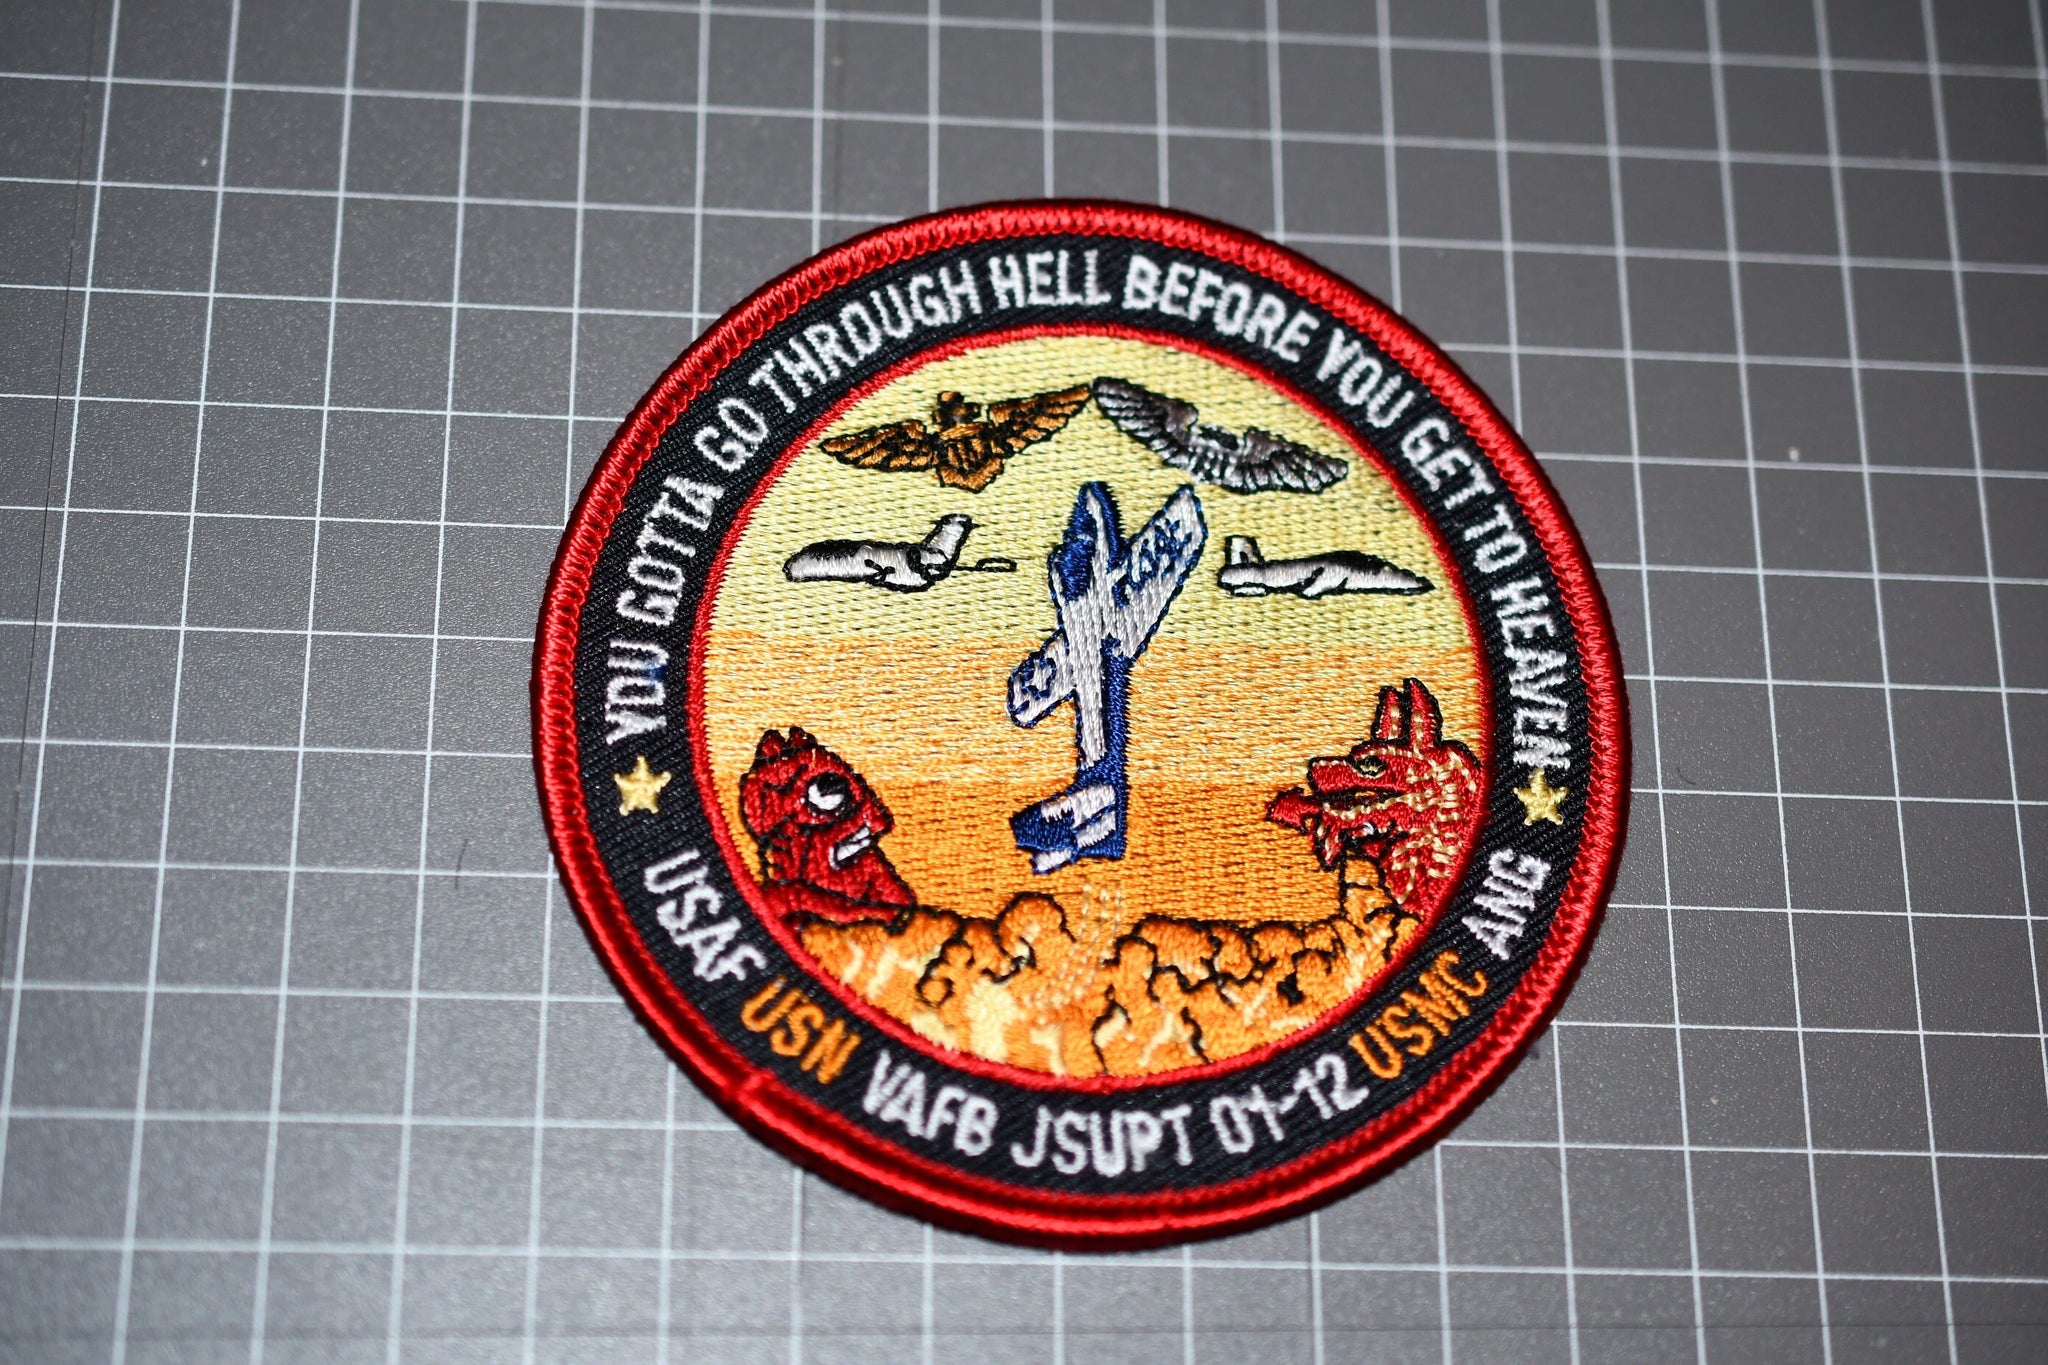 USN USAF USMC Jsupt 01-12 "You Gotta Go Through Hell Before You Get To Heaven" Patch (B9)